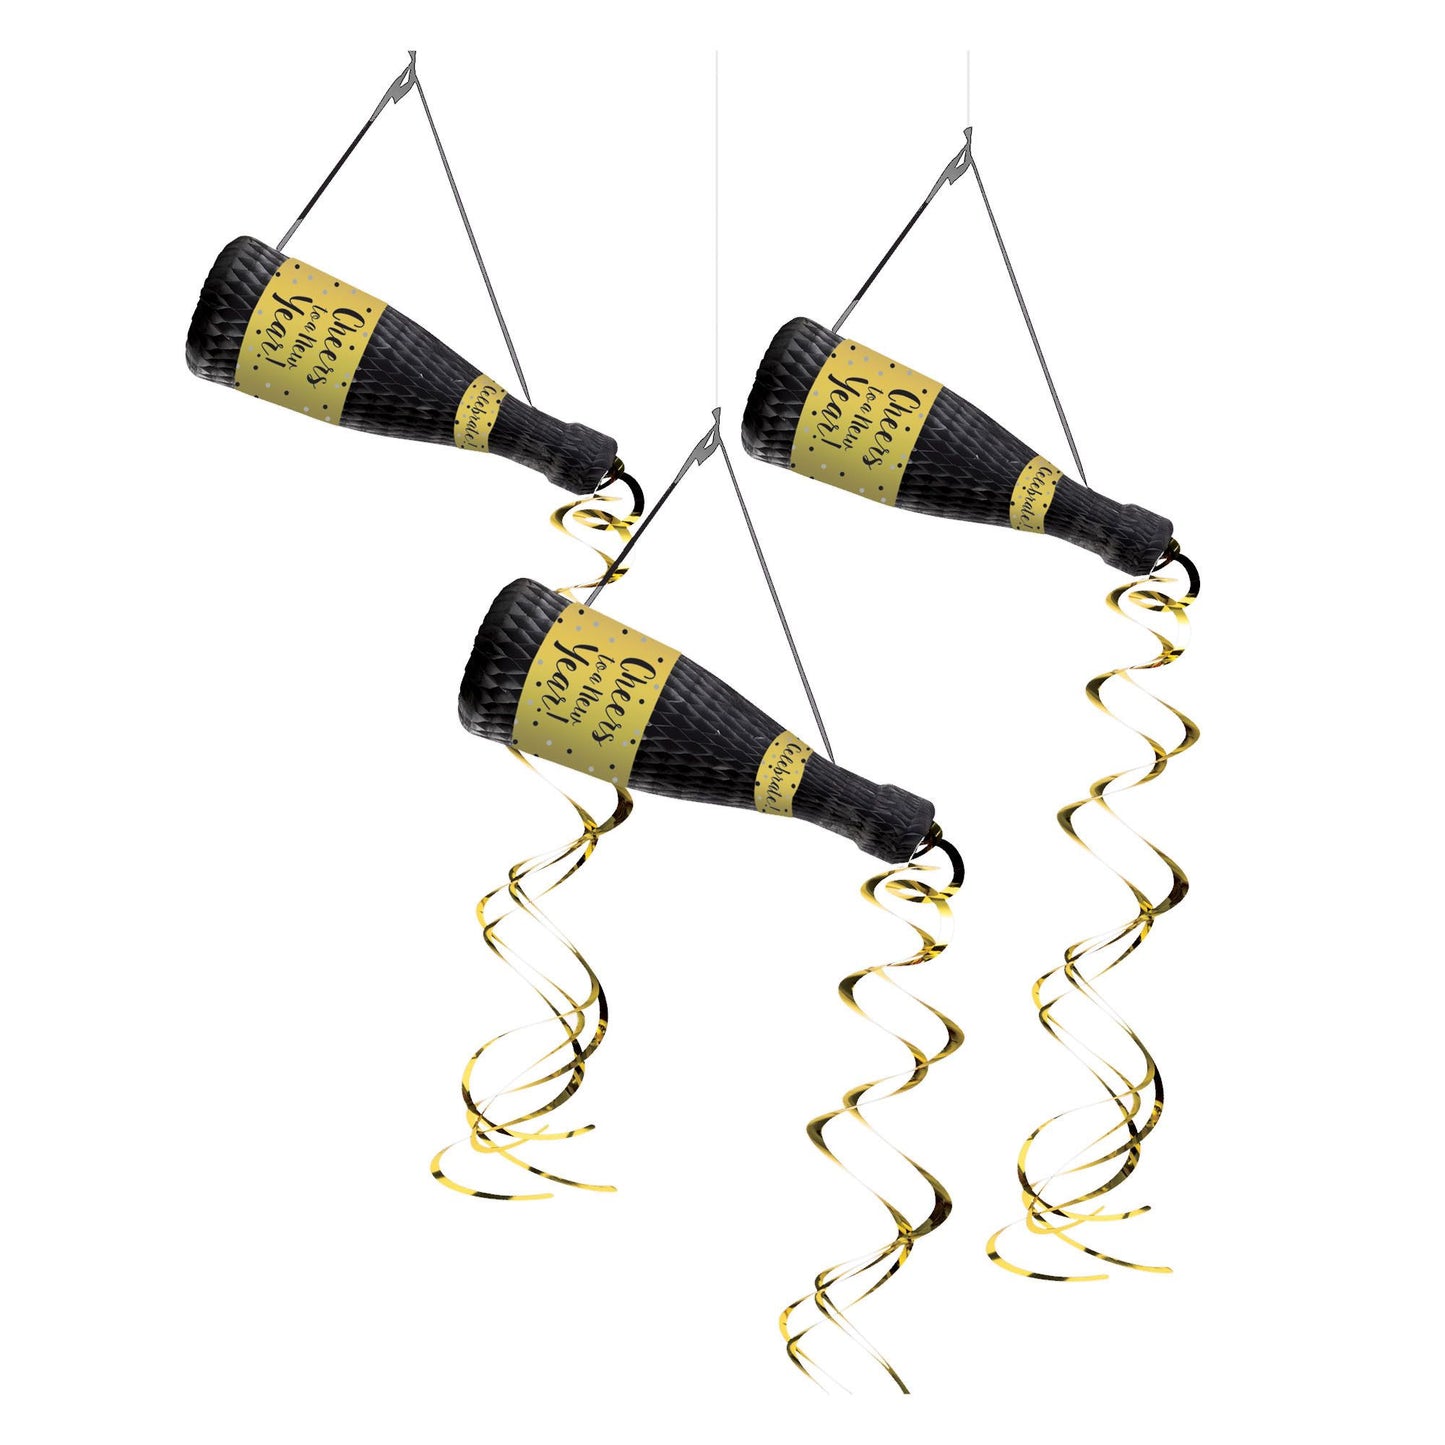 New Year's Bottle Hanging Decorations 3ct